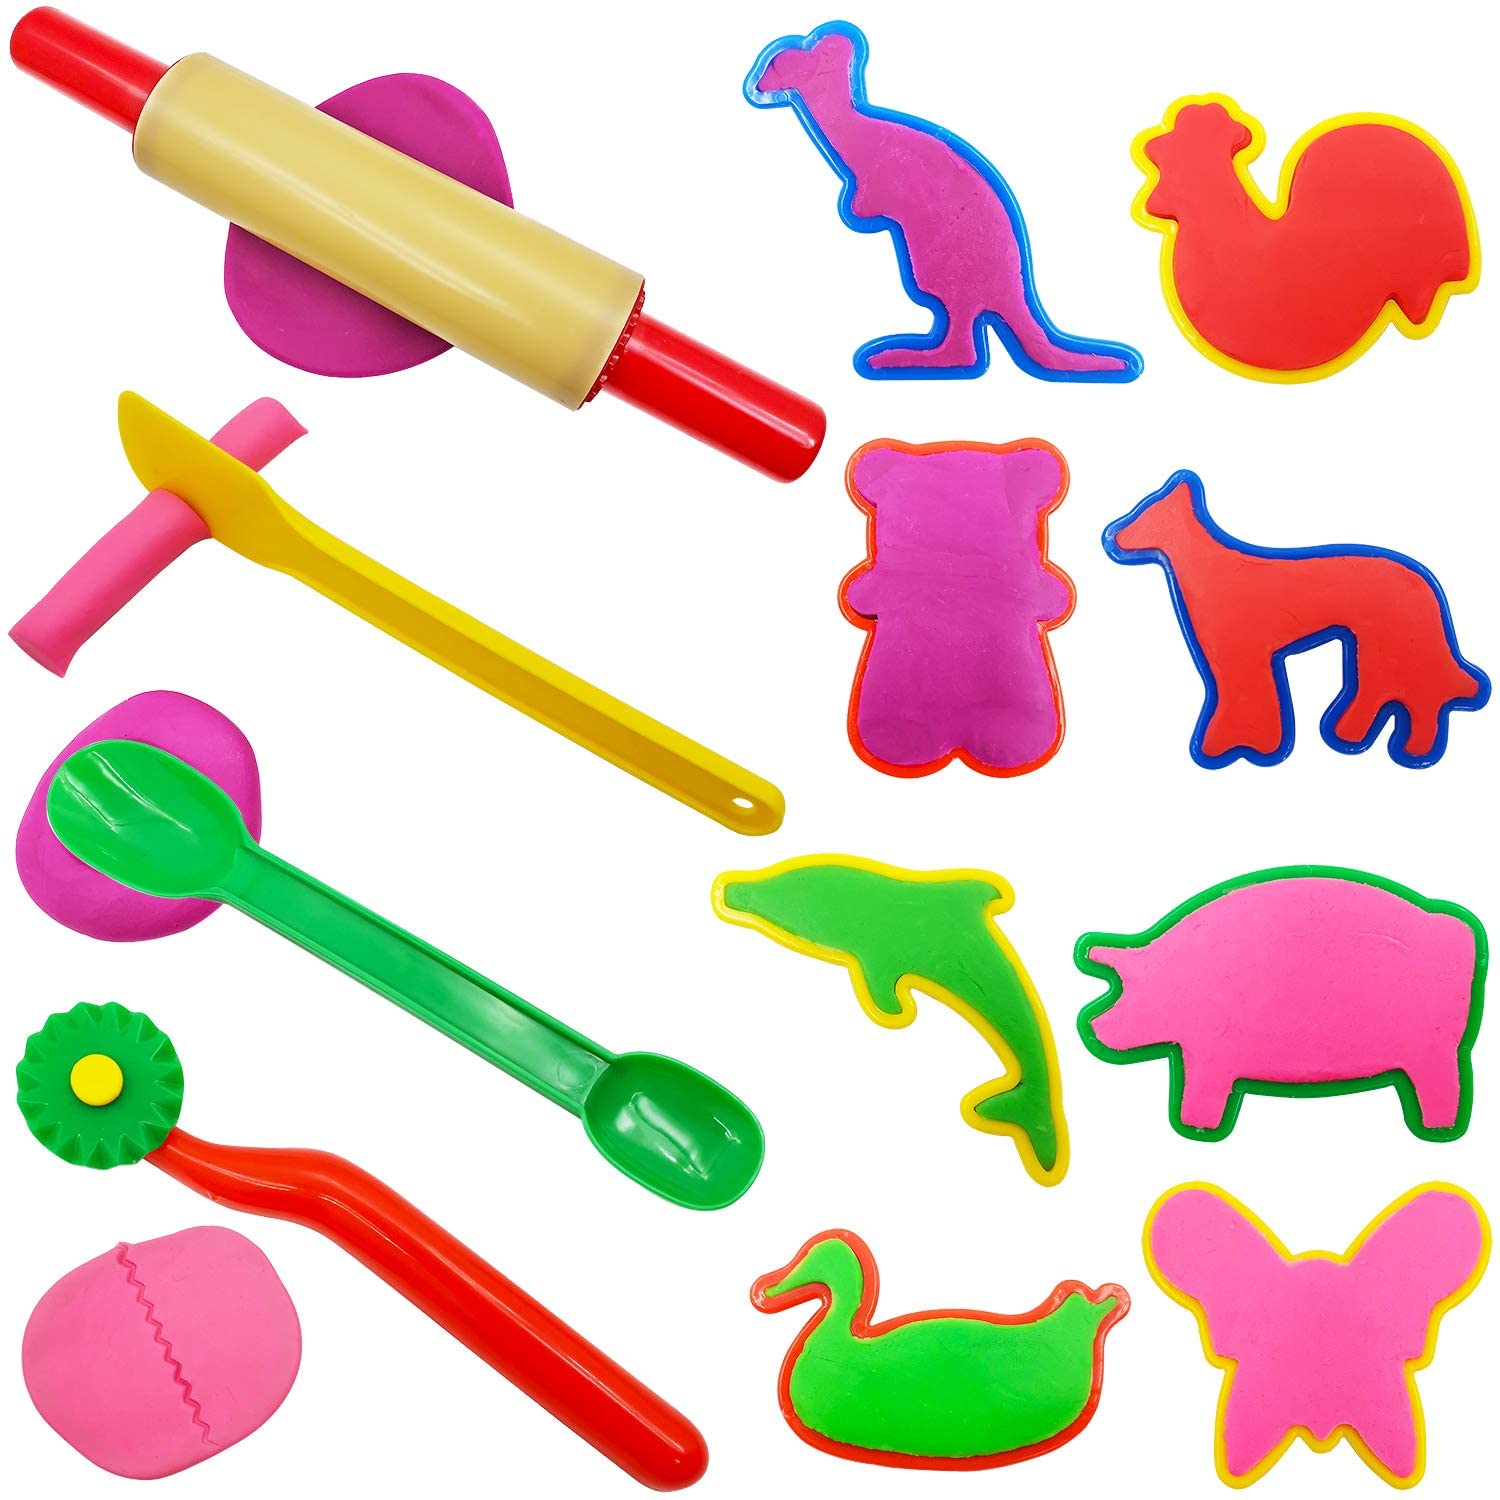 Play Dough Tools with Animal Molds, 45 PCS VS953677 - ToysChoose